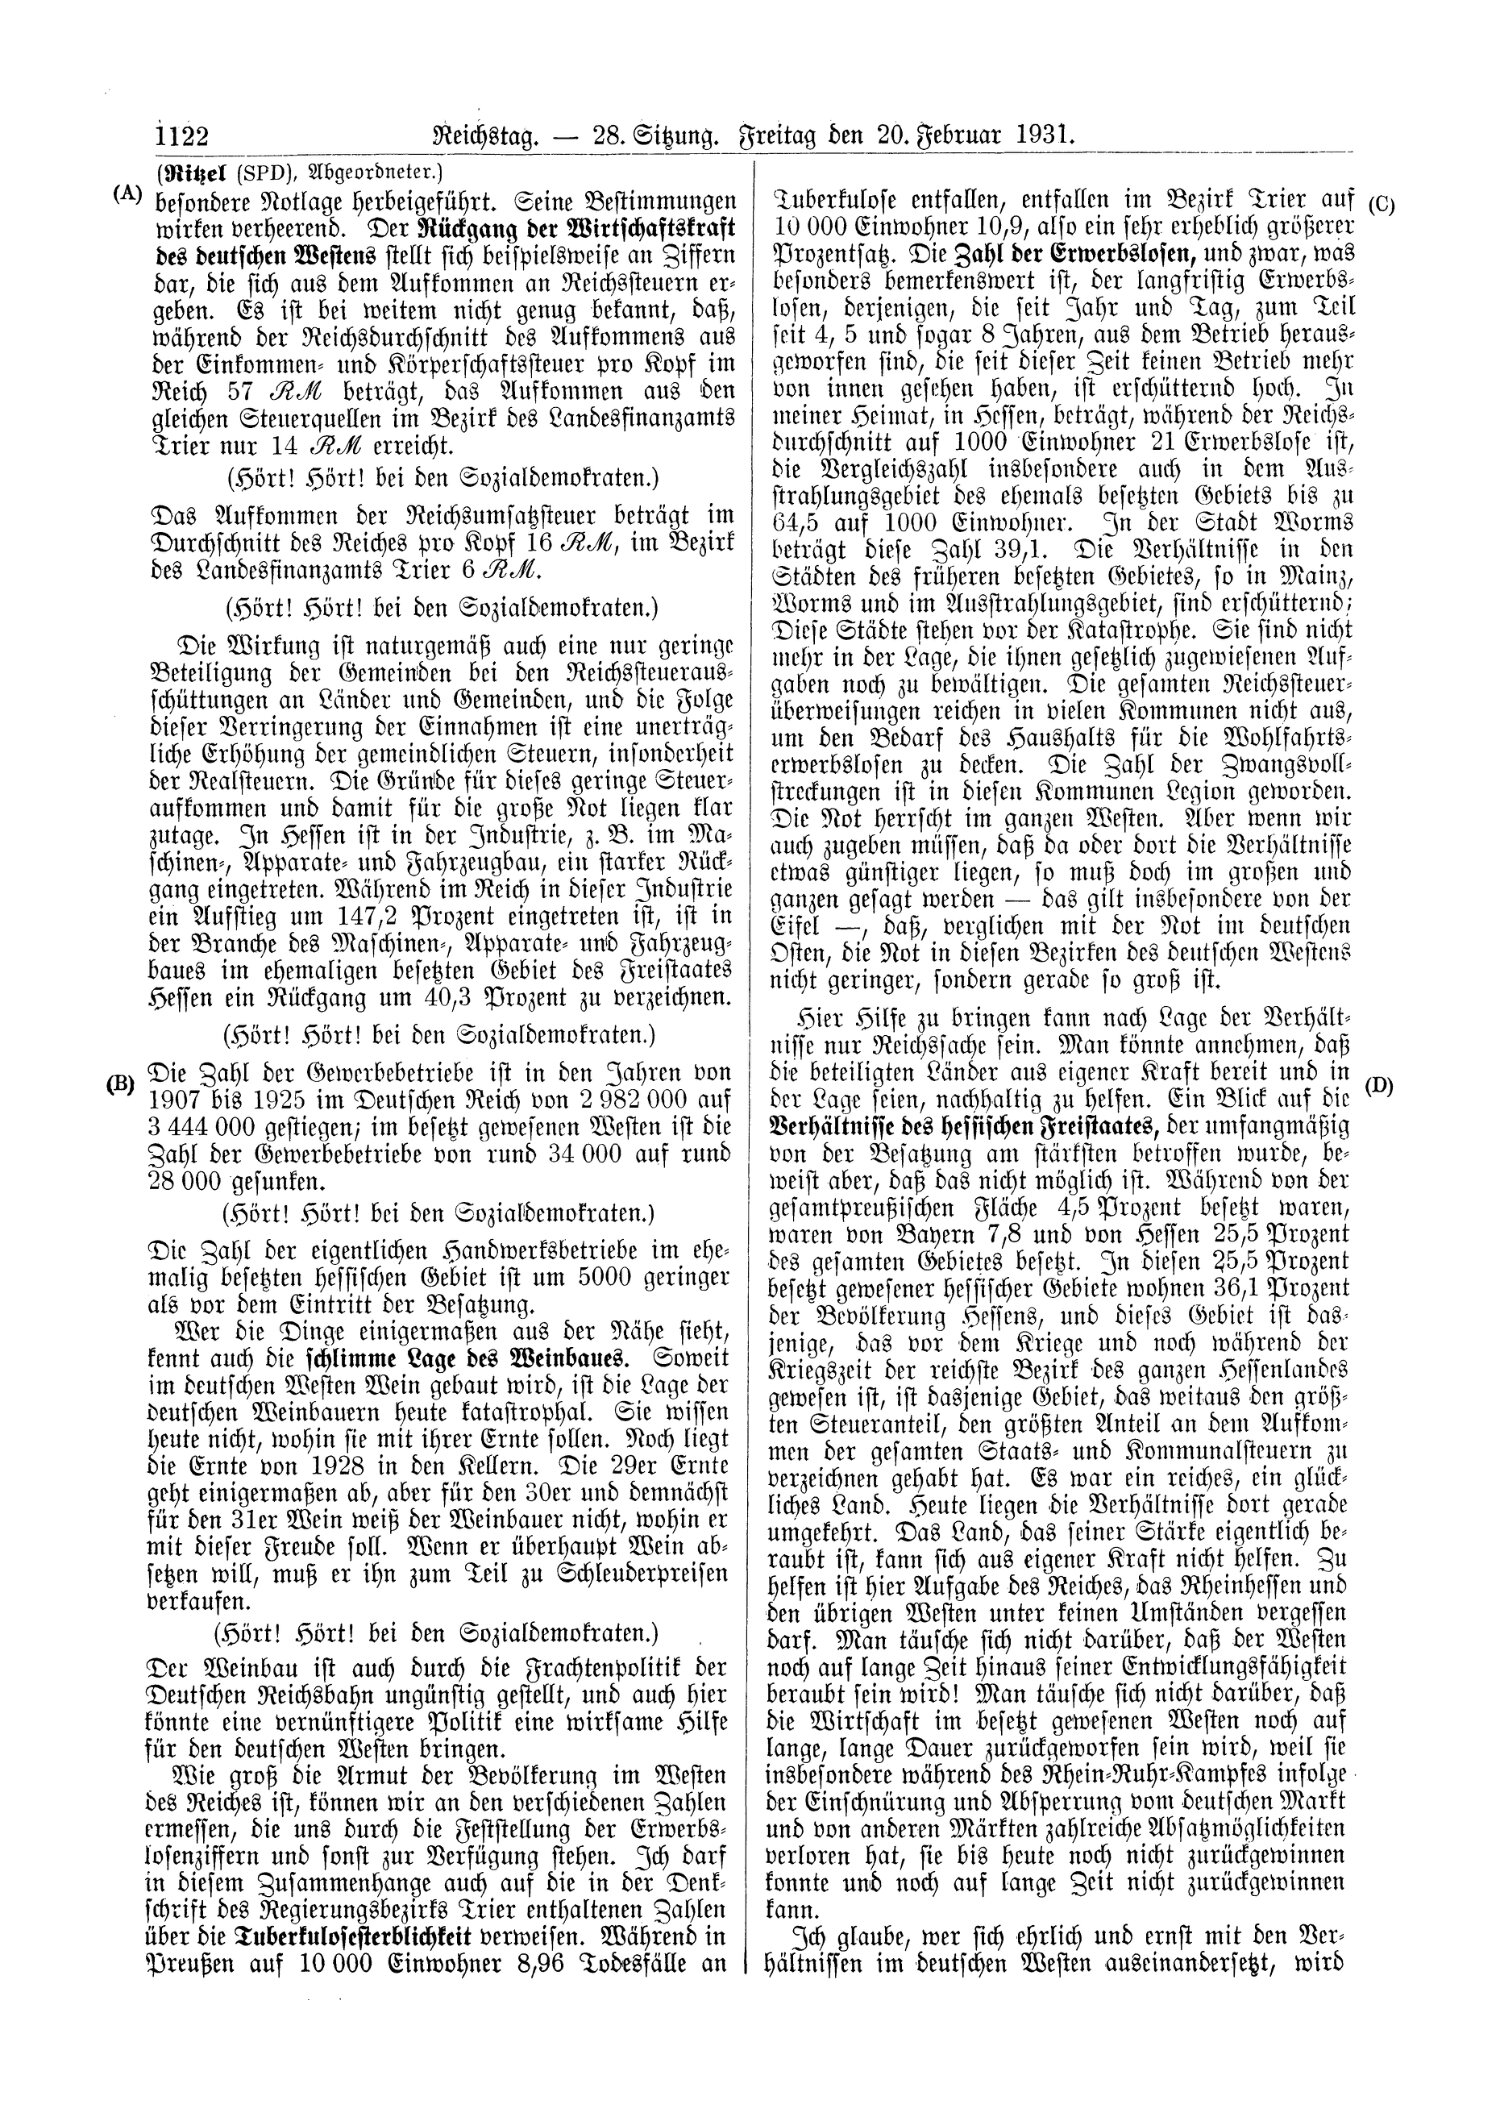 Scan of page 1122